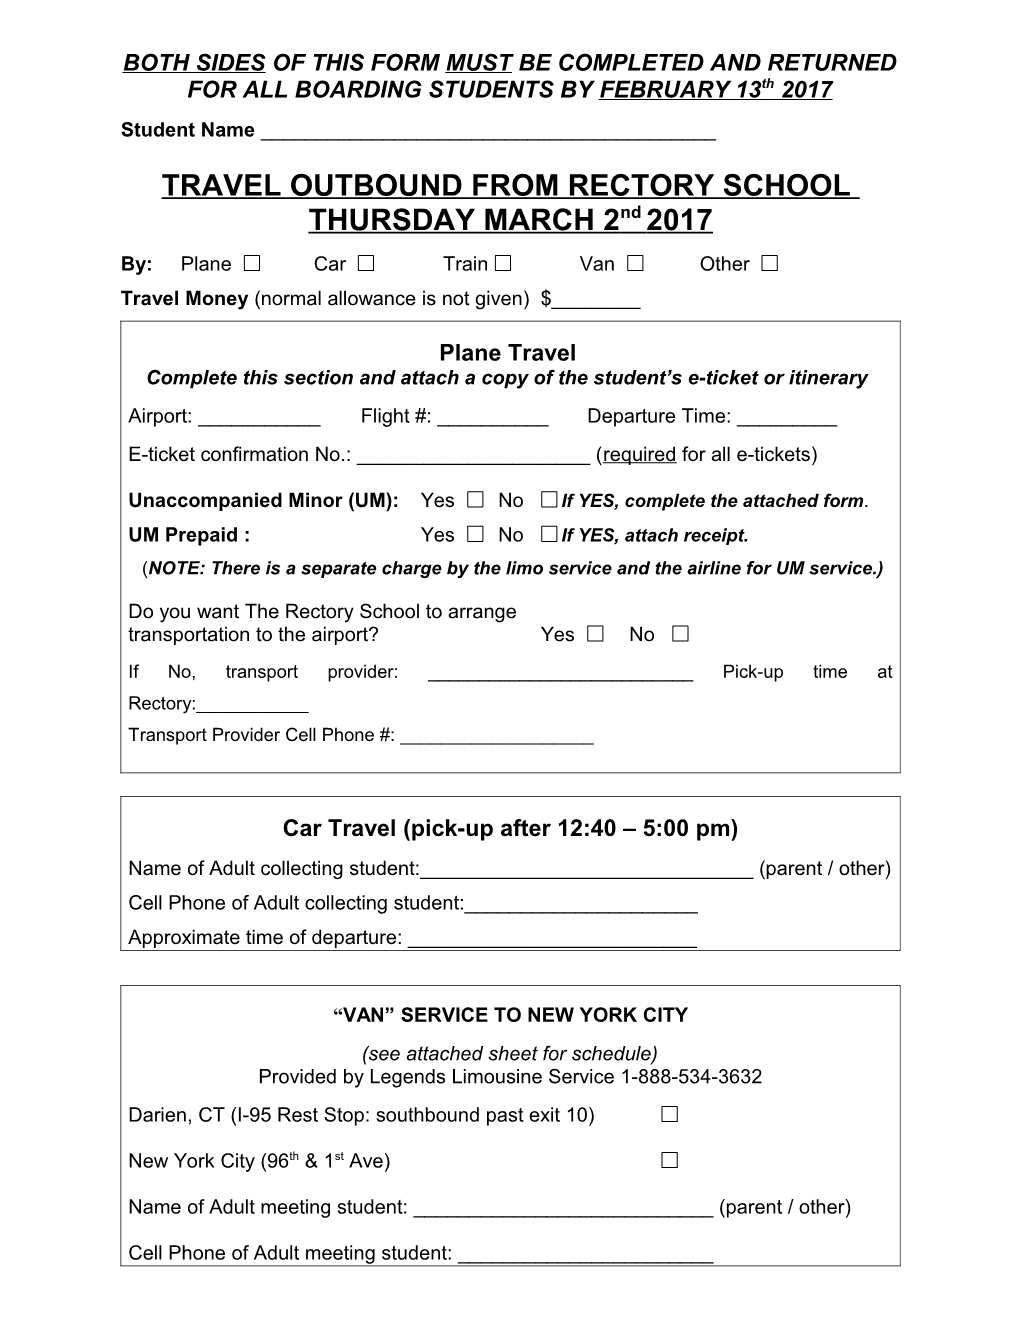 Travel Outbound from Rectory School